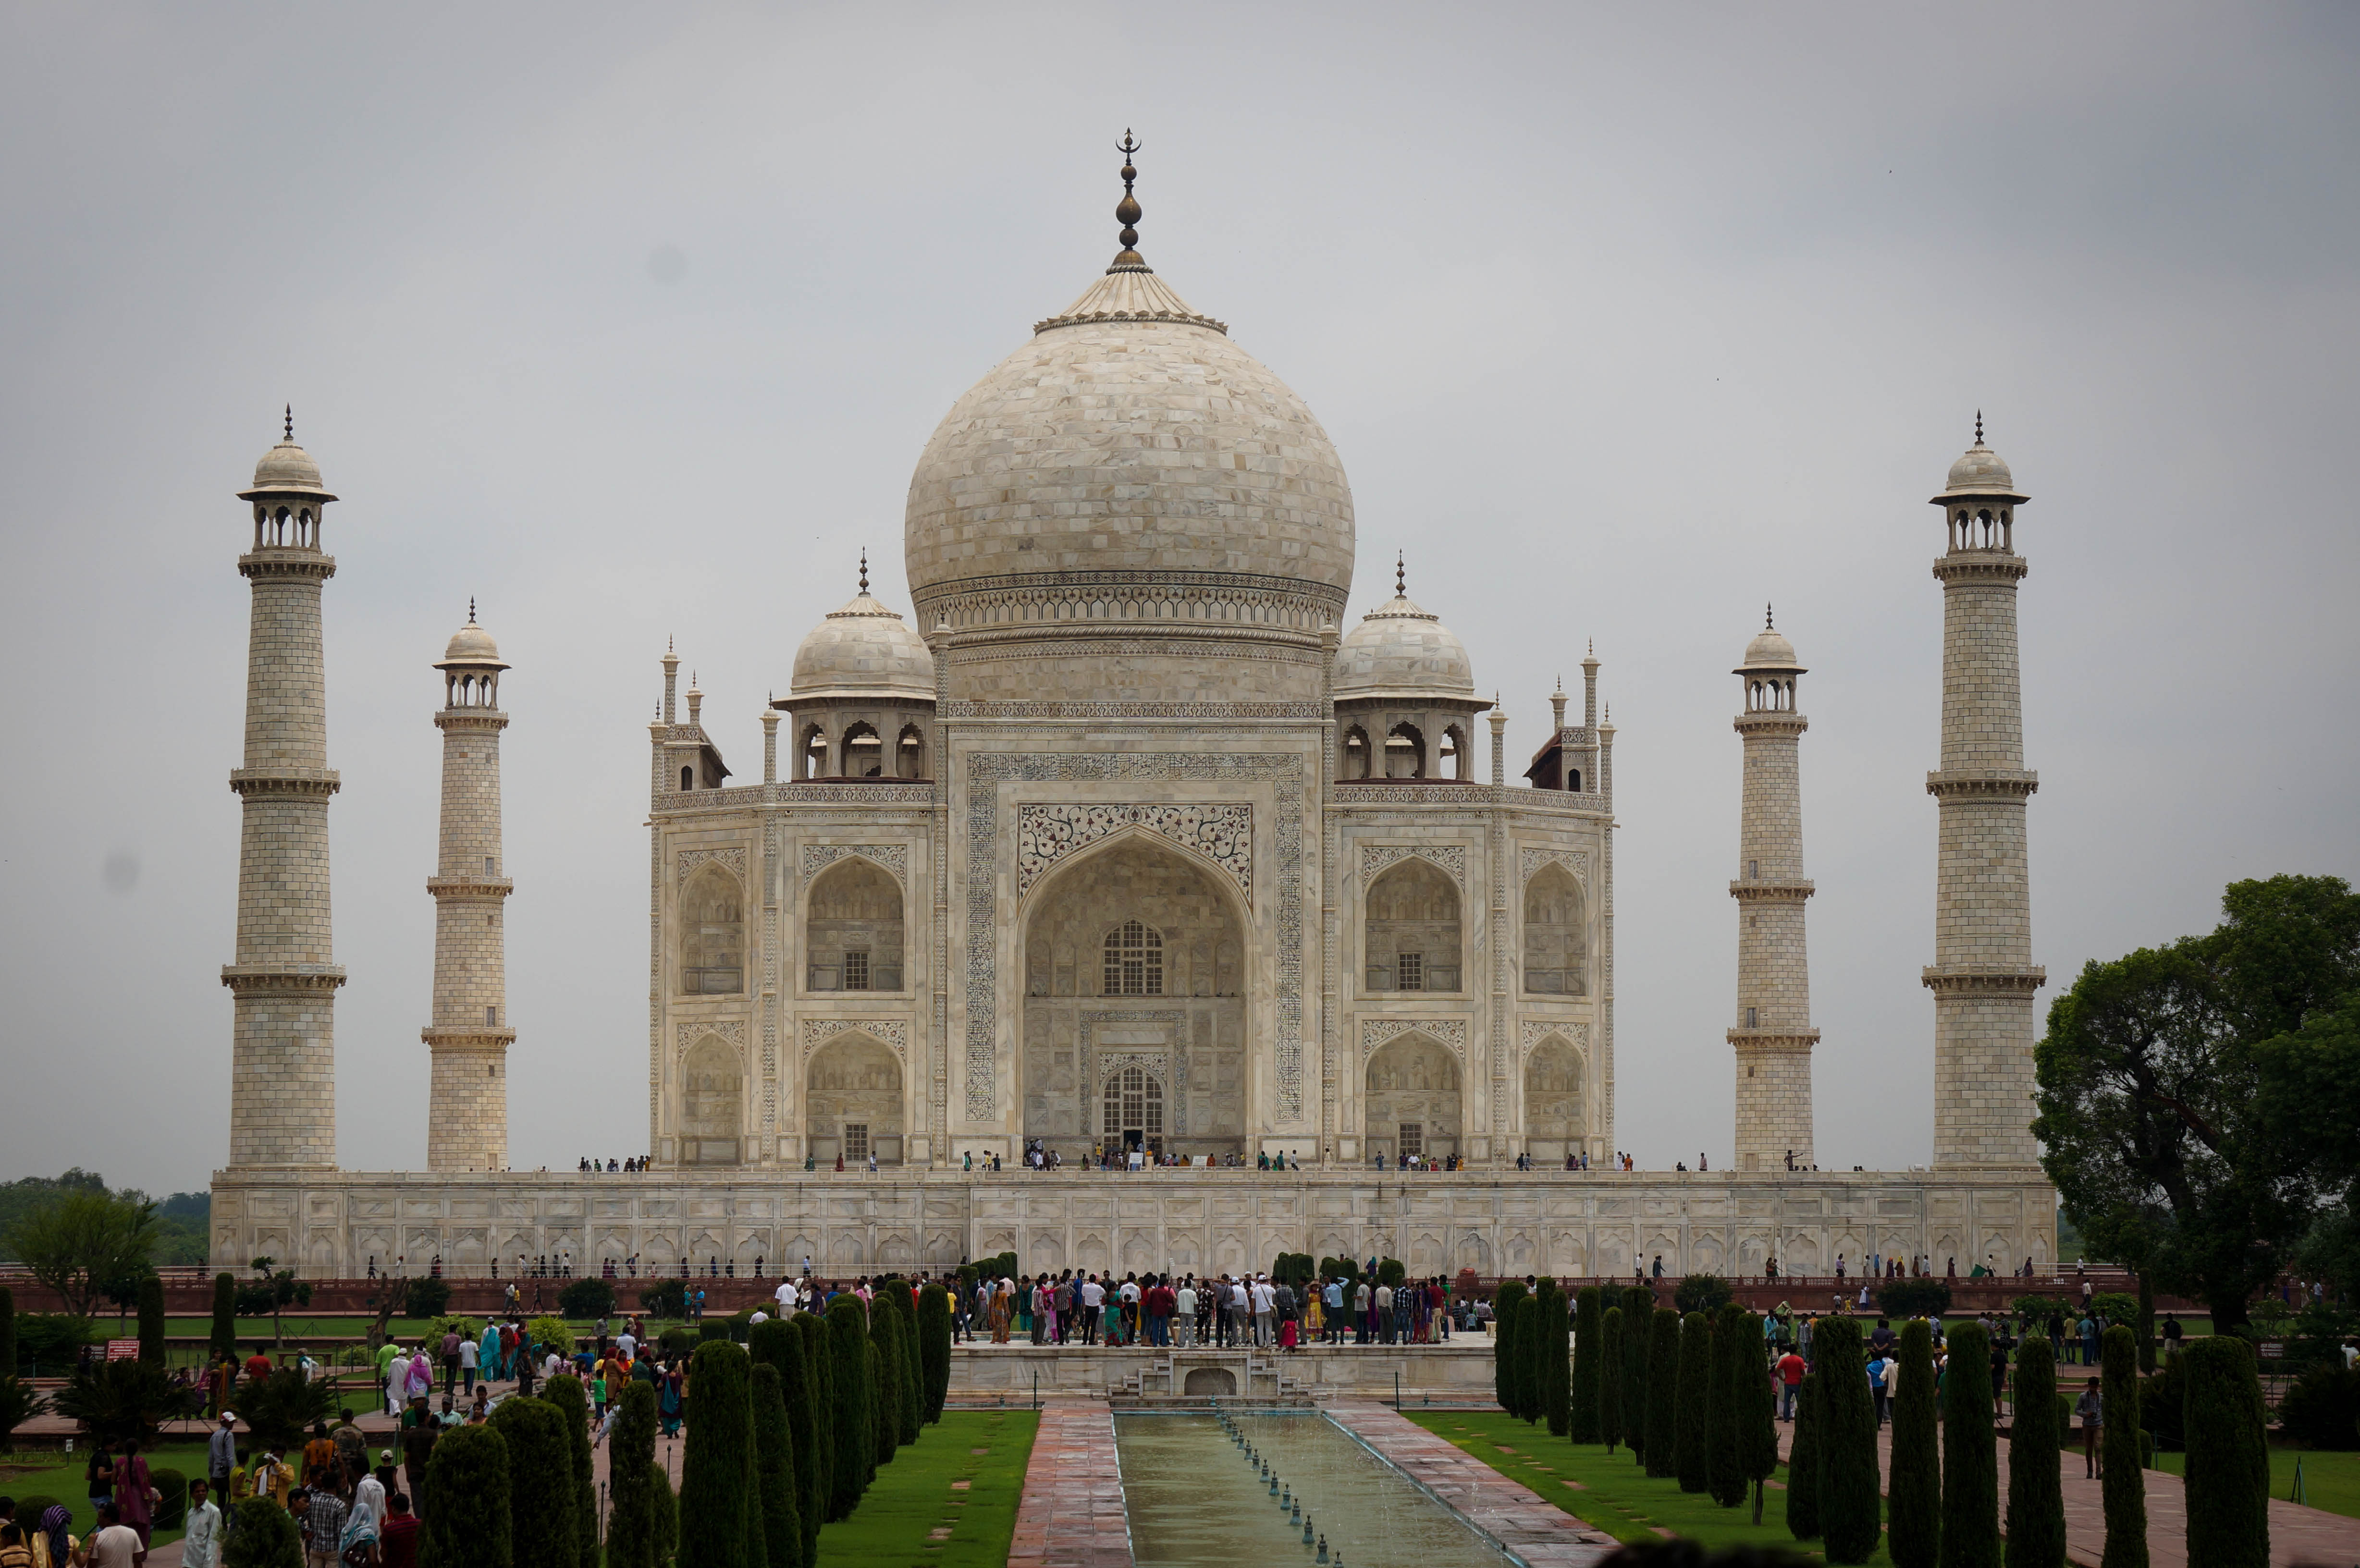 What is the importance of the Taj Mahal?